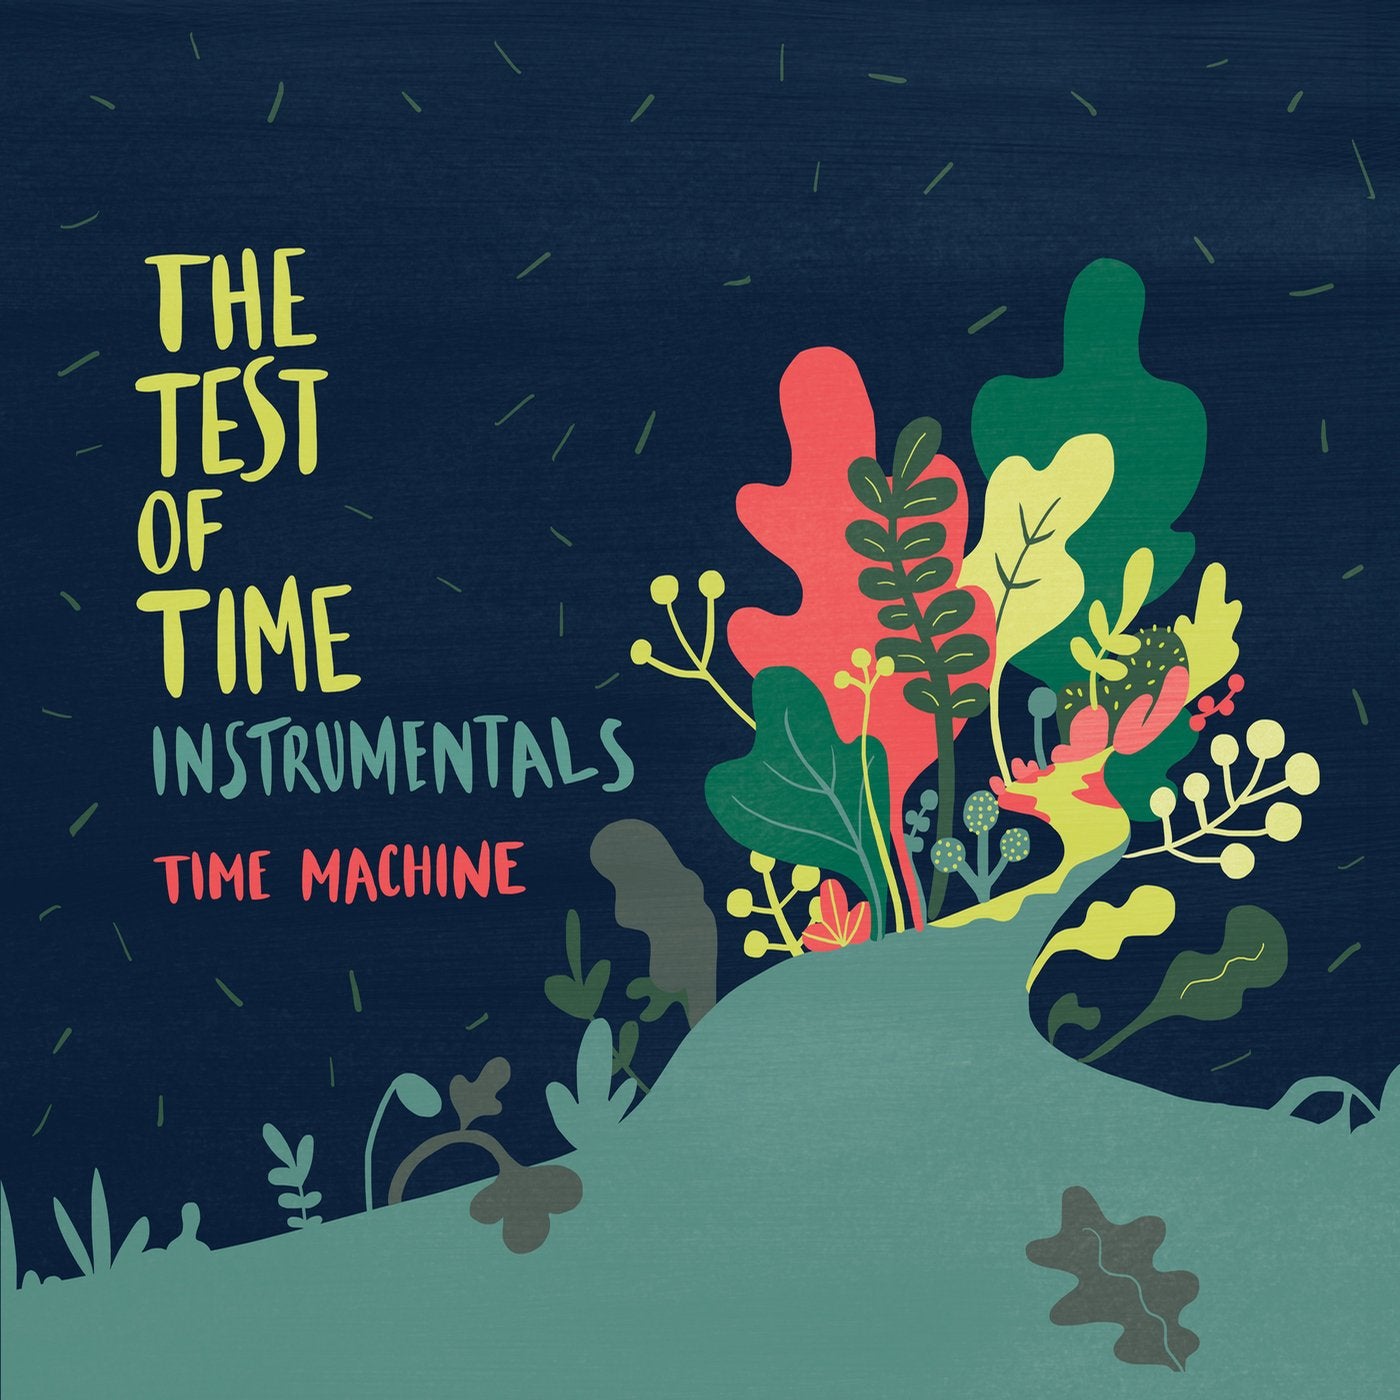 The Test of Time Instrumentals